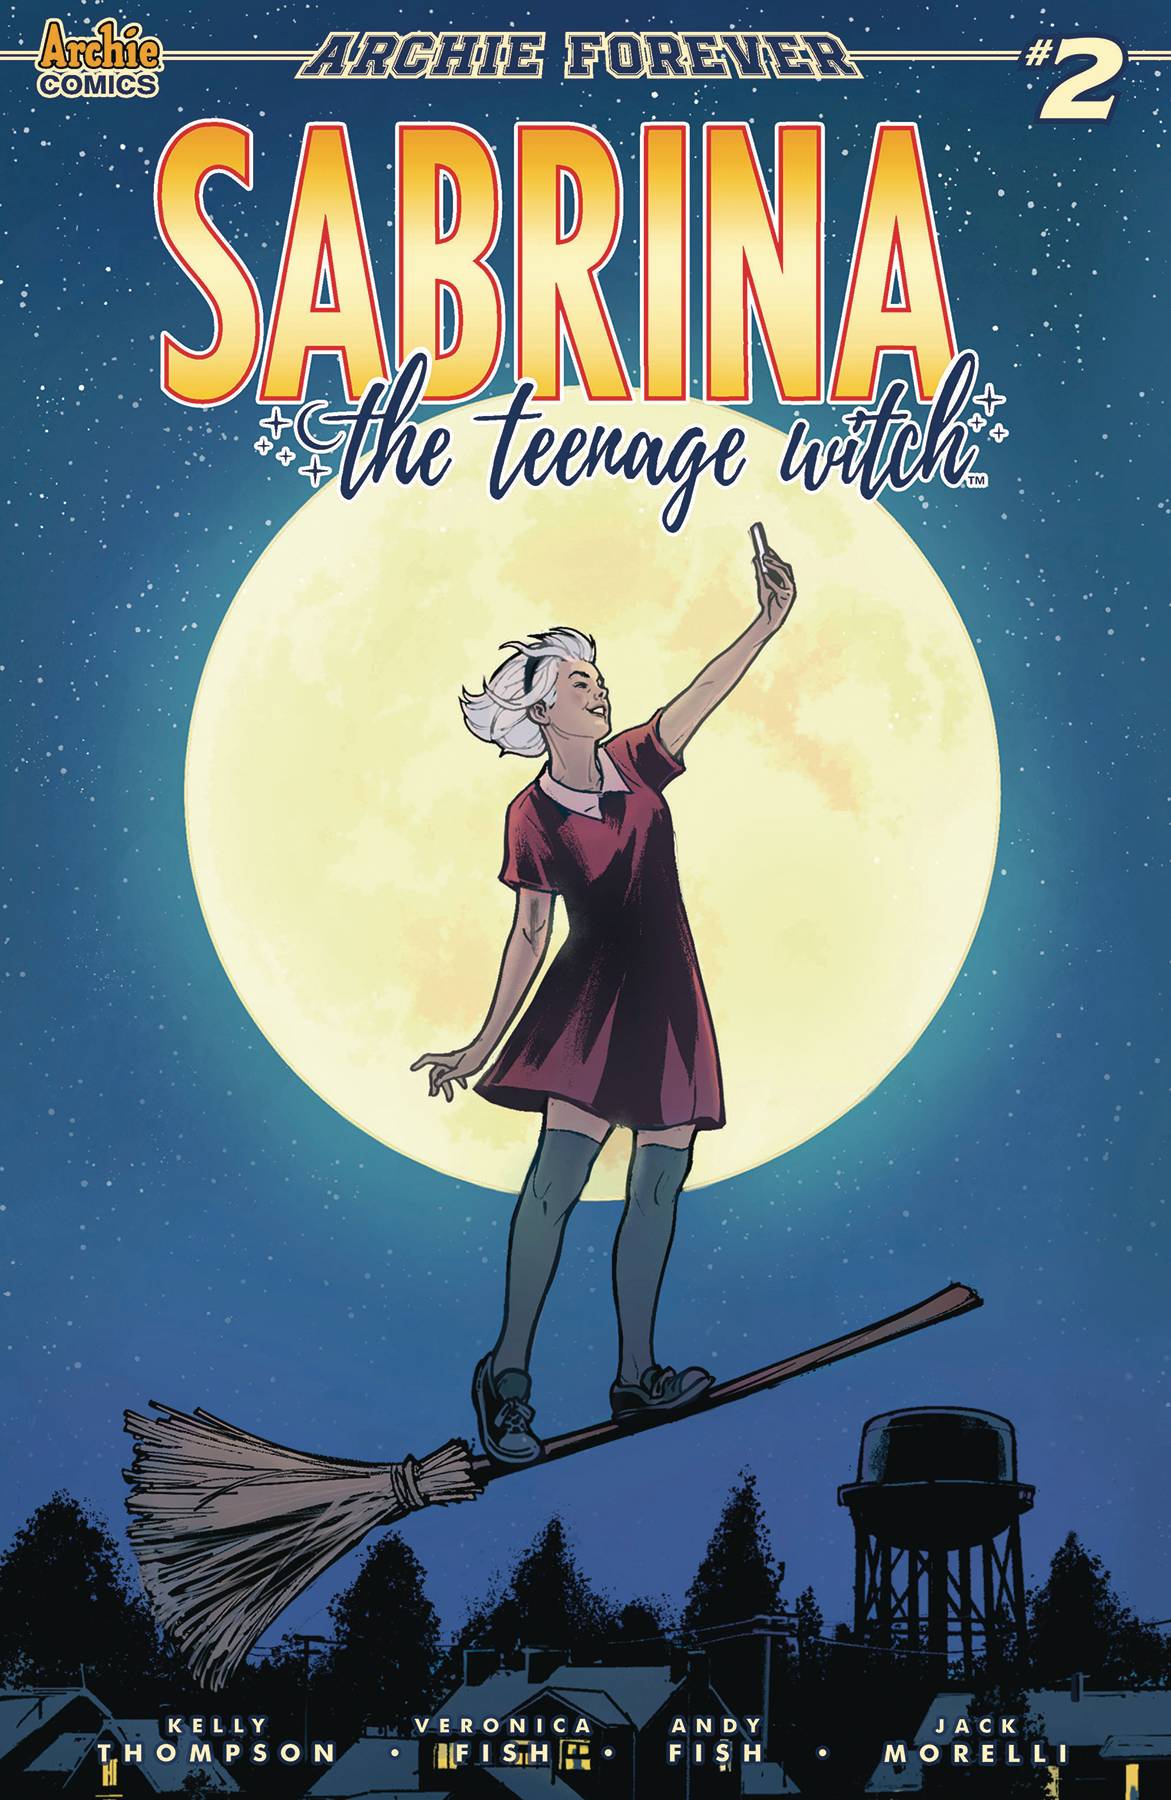 Sabrina the Teenage Witch #2 (of 5) Variant Edition (Ibanez) [2019]